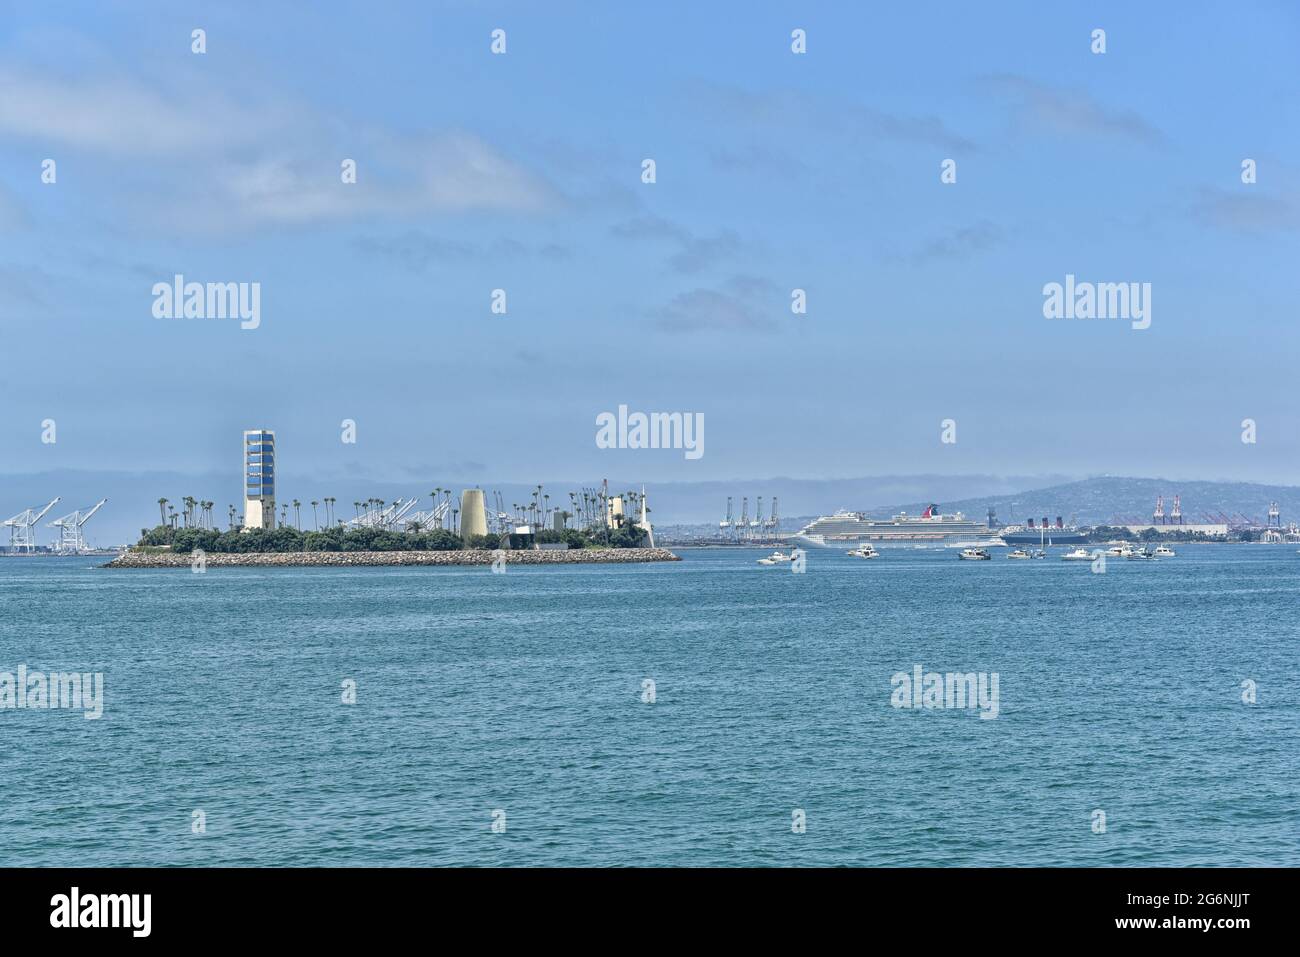 LONG BEACH, CALIFORNIA - 5 JULY 2021: Island White seem from the Belmont Veterans Memorial Pier, with the Queen Mary and Crusie Ship in the Background Stock Photo